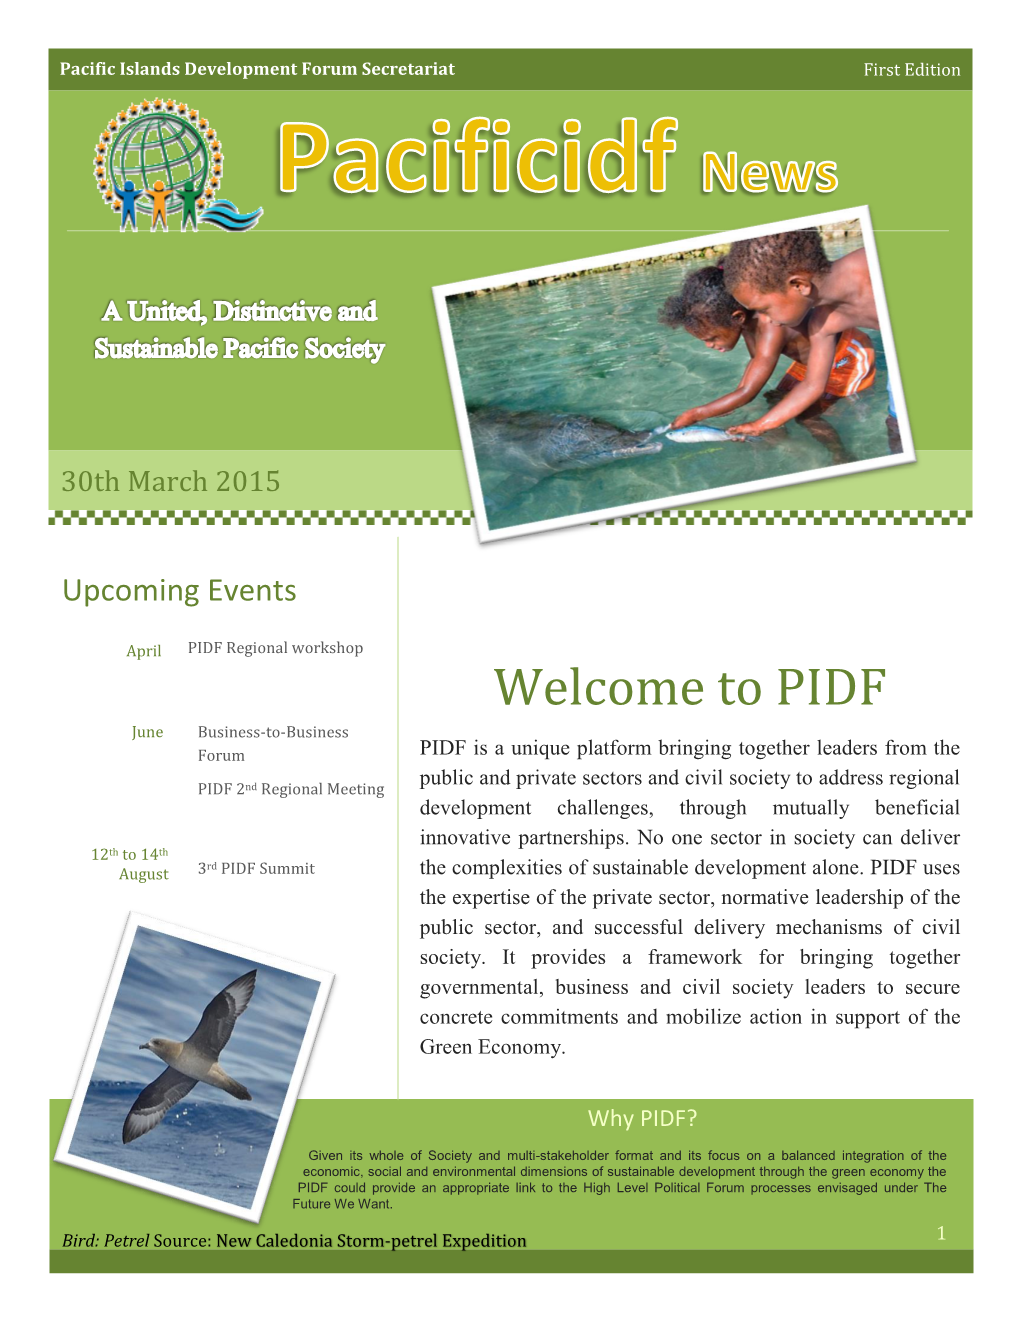 Welcome to PIDF